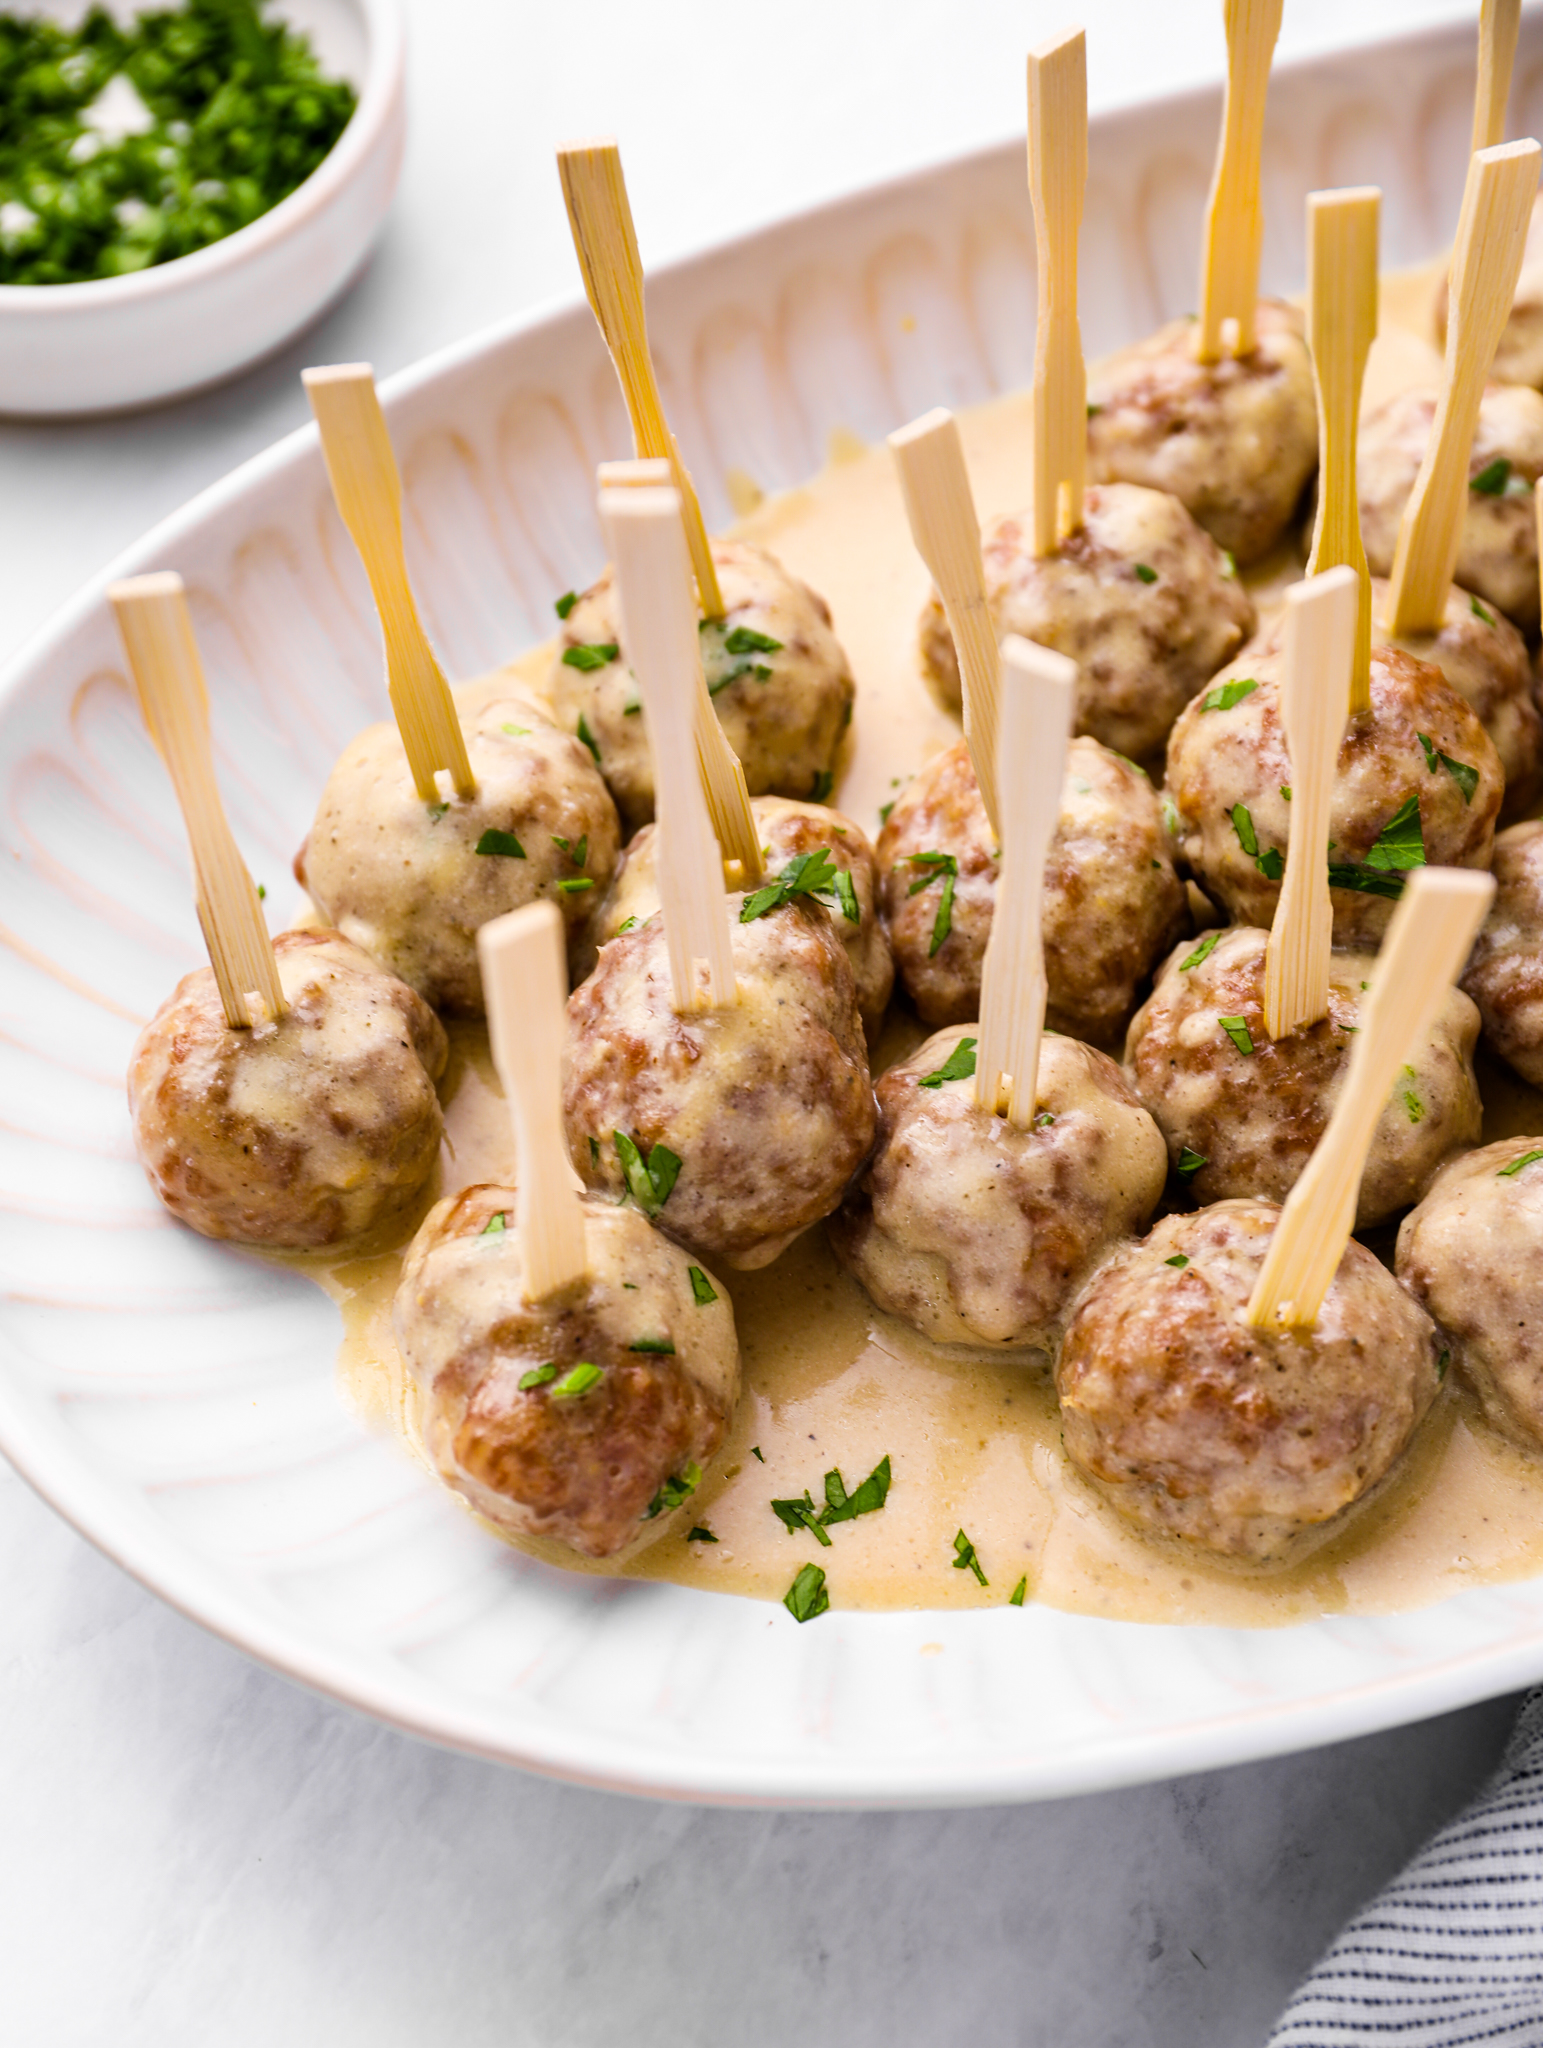 Plate of Swedish meatballs on small skewers.